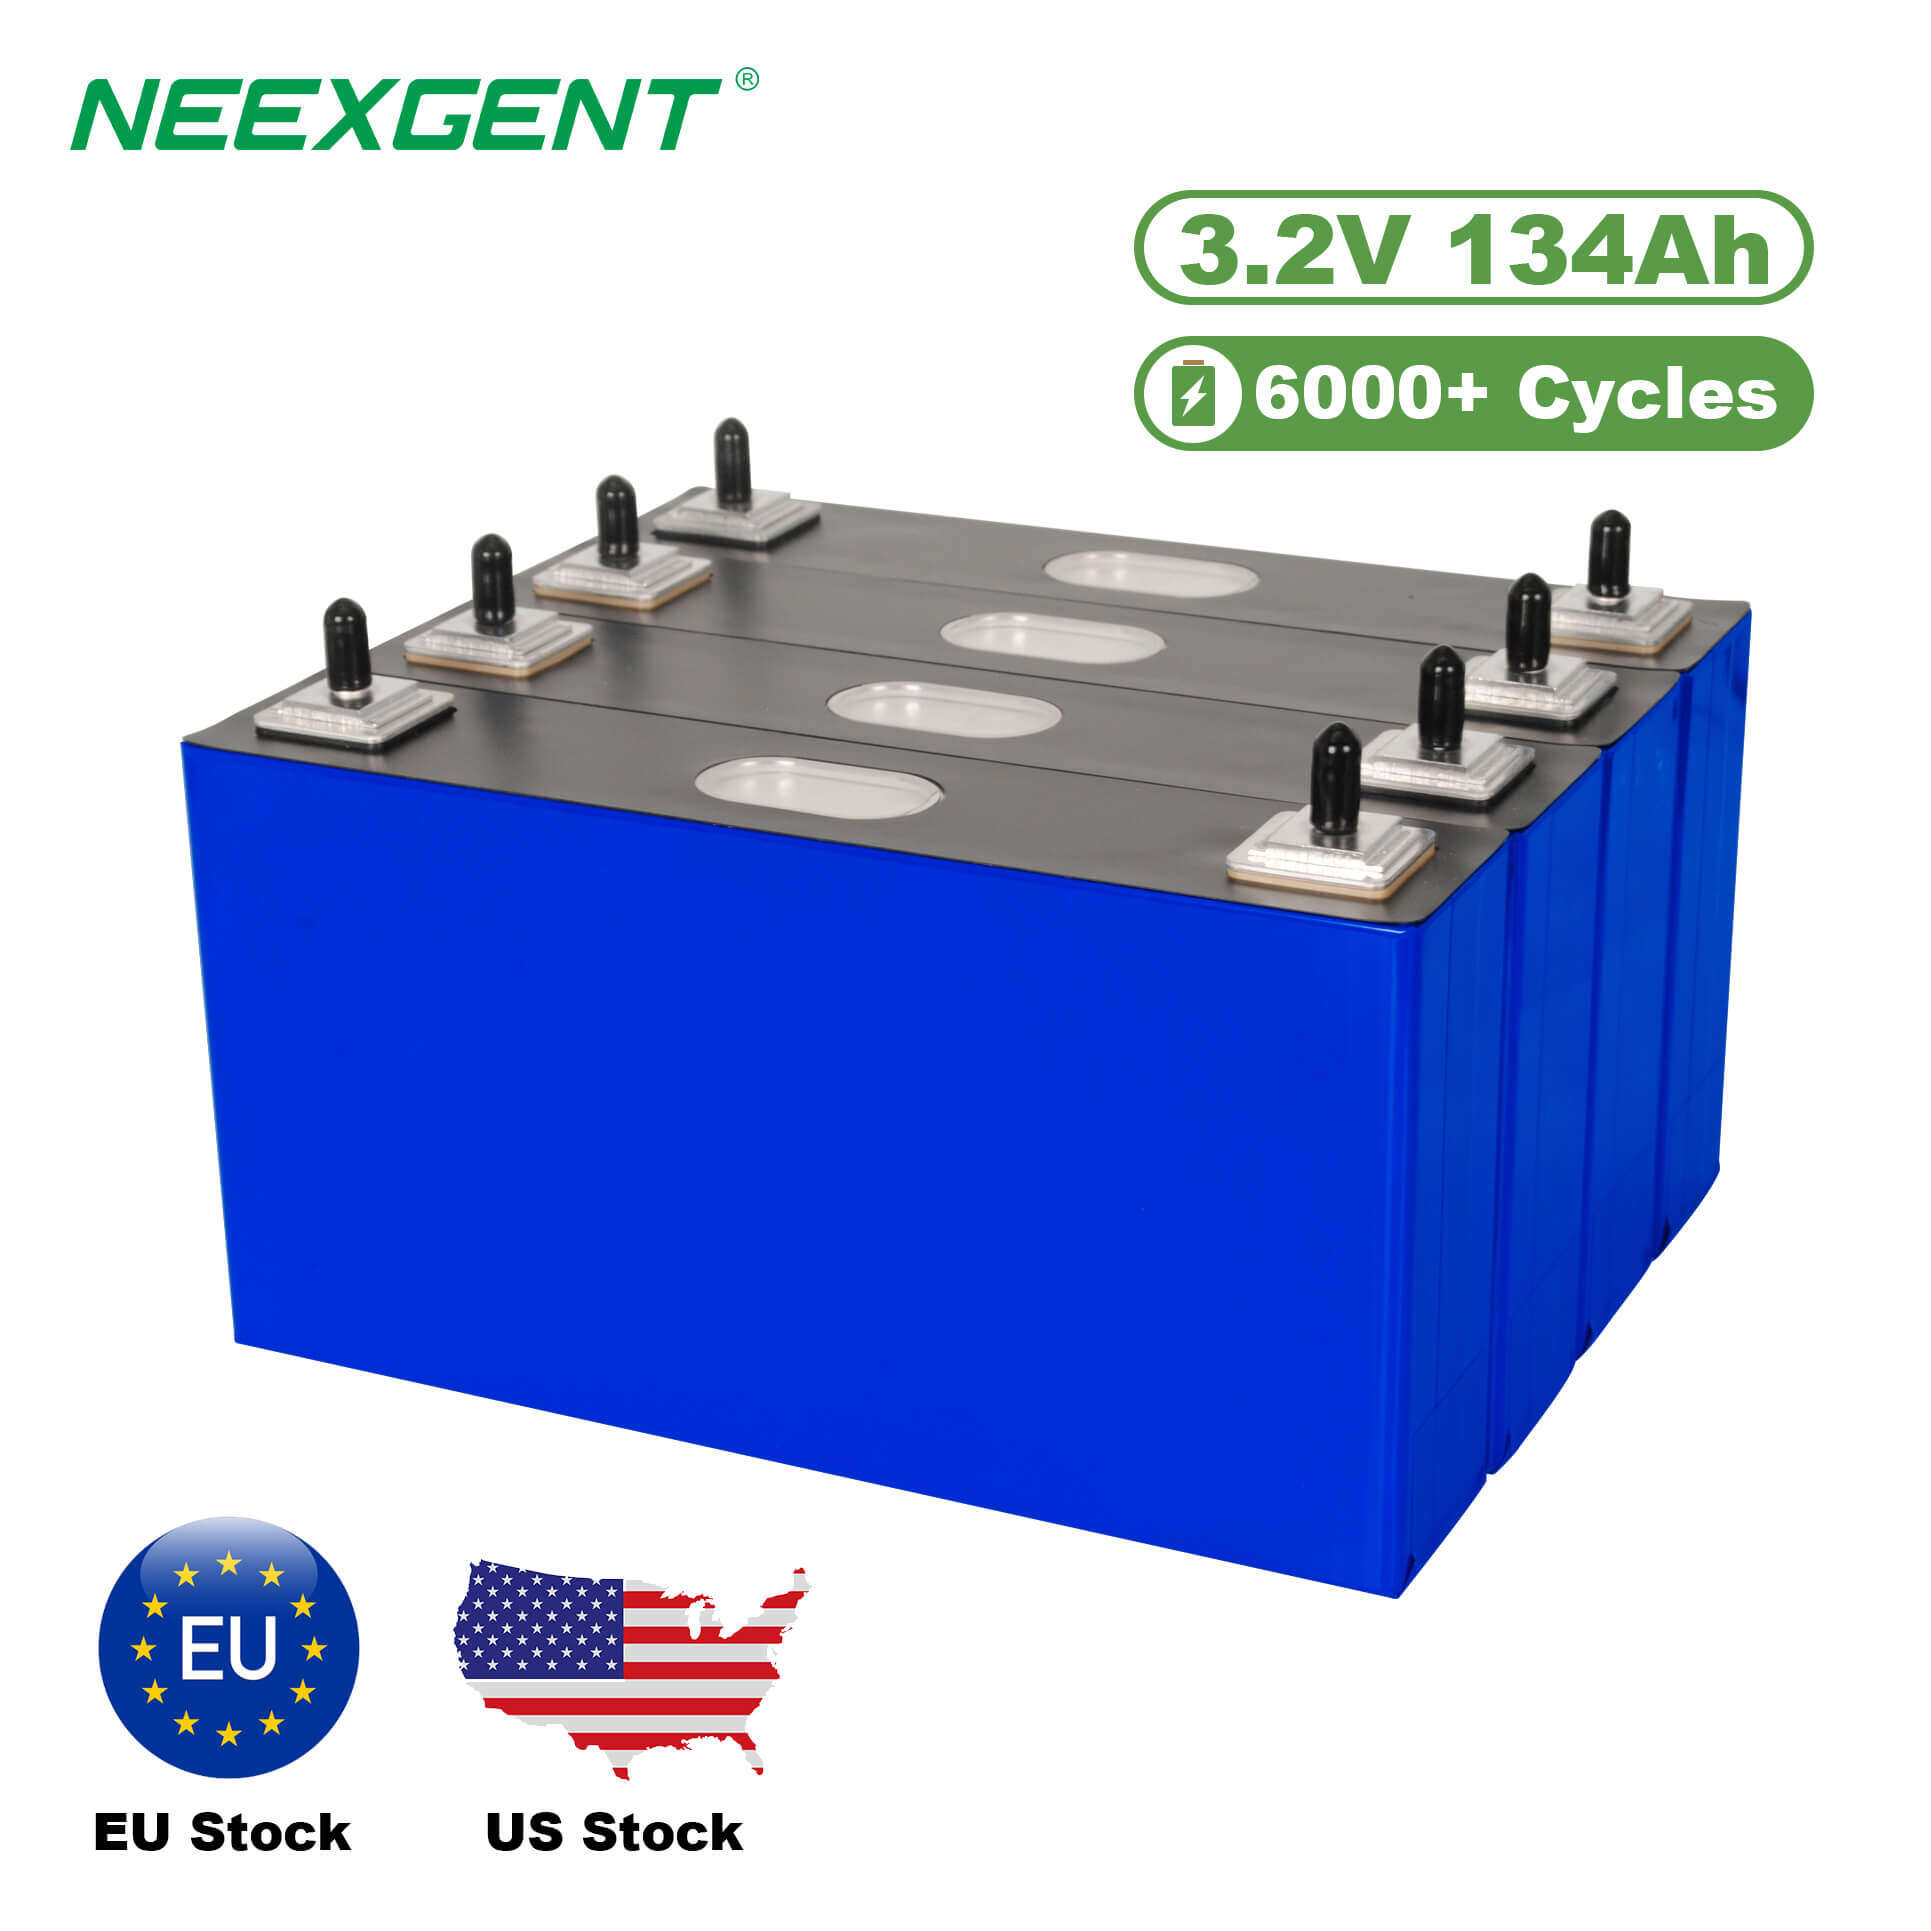 Neexgent High Capacity Lifepo4 Lithium Battery Pack Energy Storage System 3.2v 134ah Lifepo4 Cell